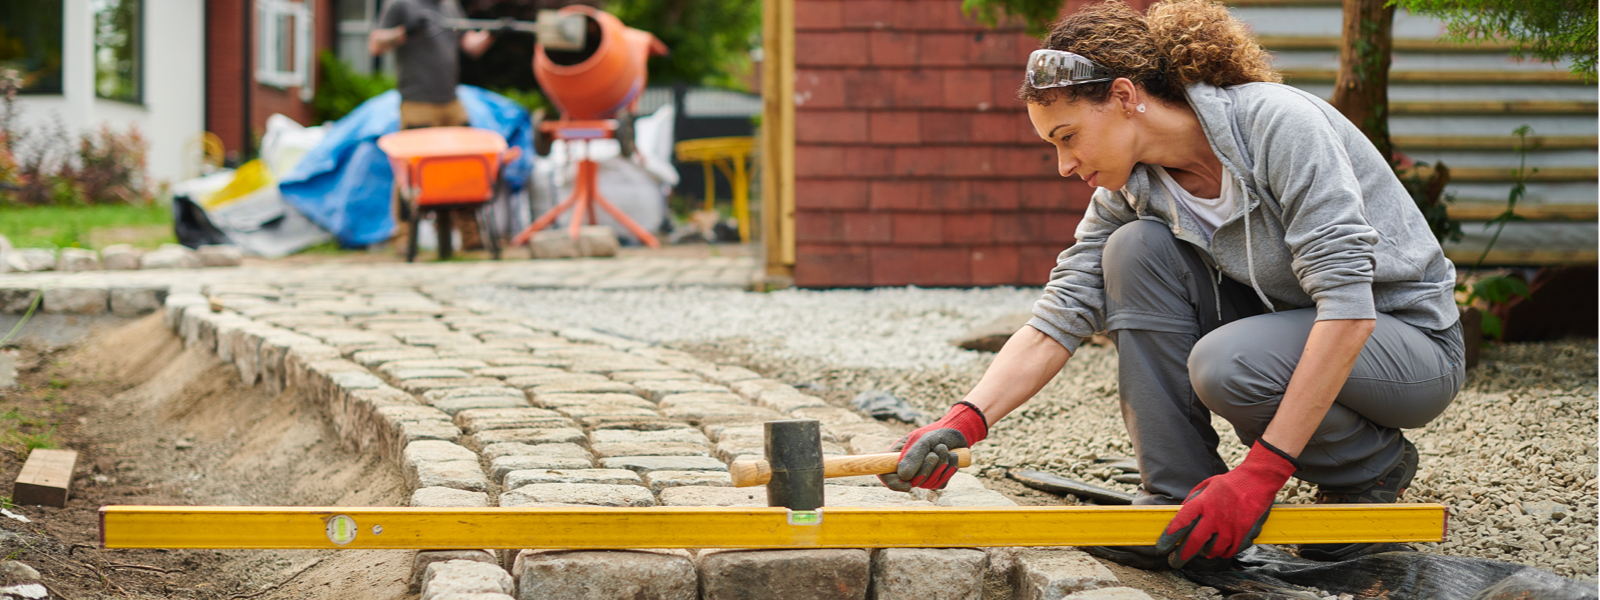 Women leveling paving stones, a possible DIY project idea from Instagram